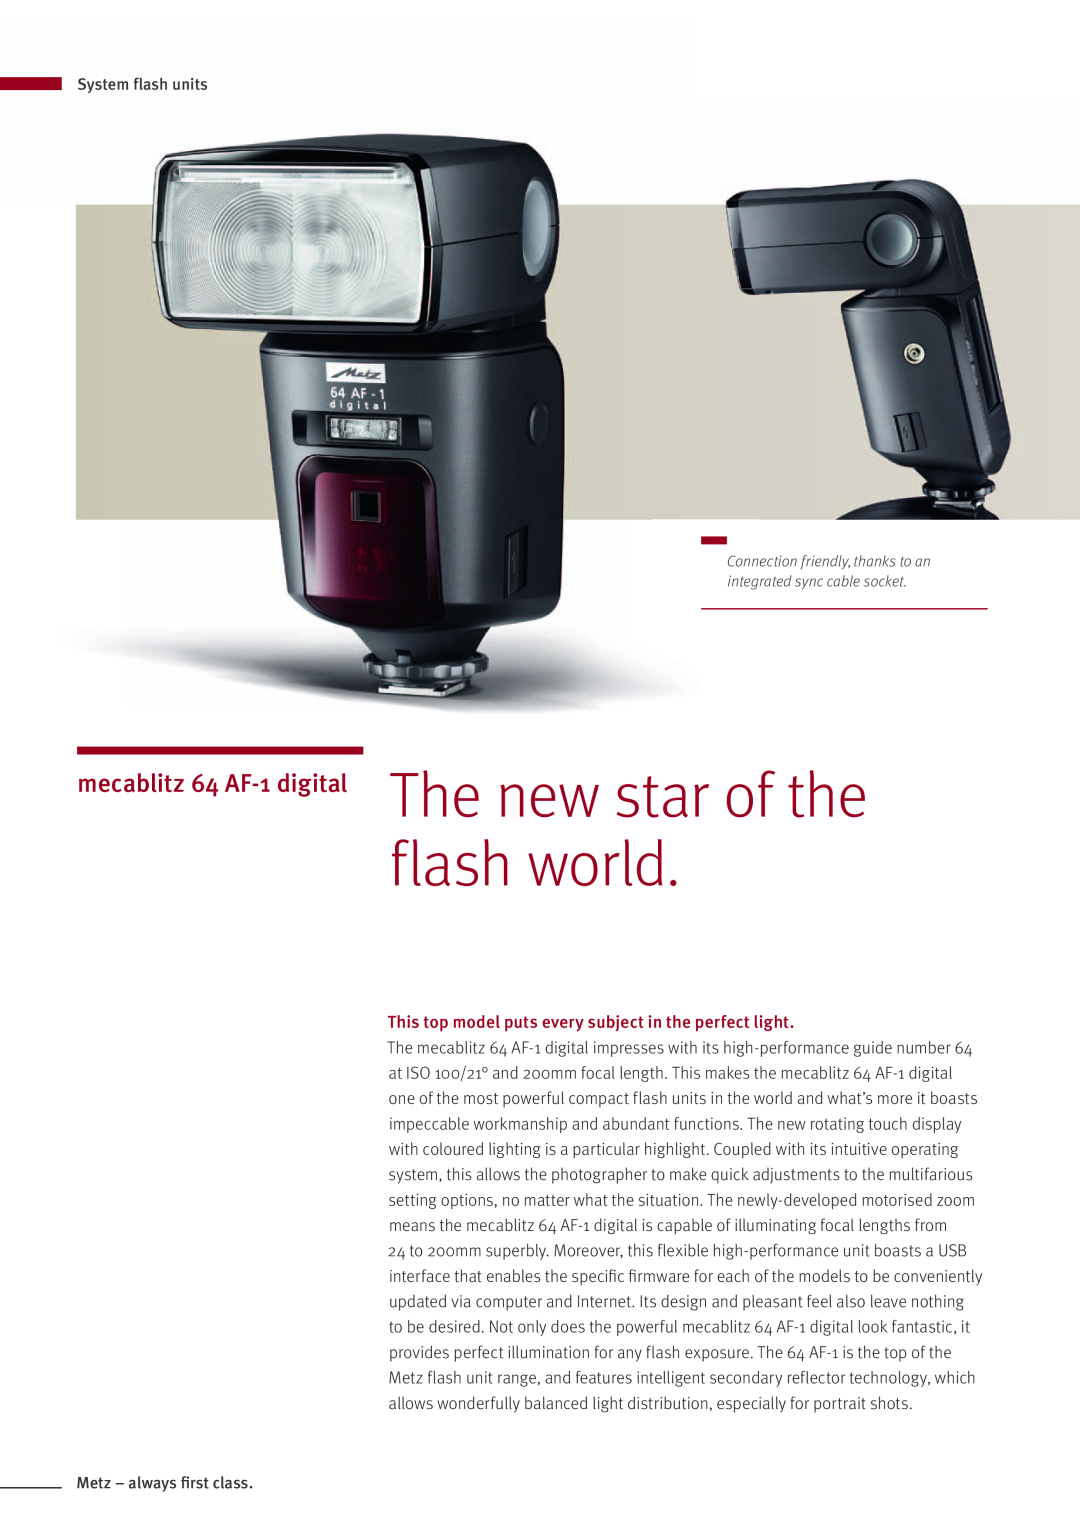 Metz MZ 44314N flash world, mecablitz 64 AF-1 digital The new star of the, System flash units, Metz - always first class 